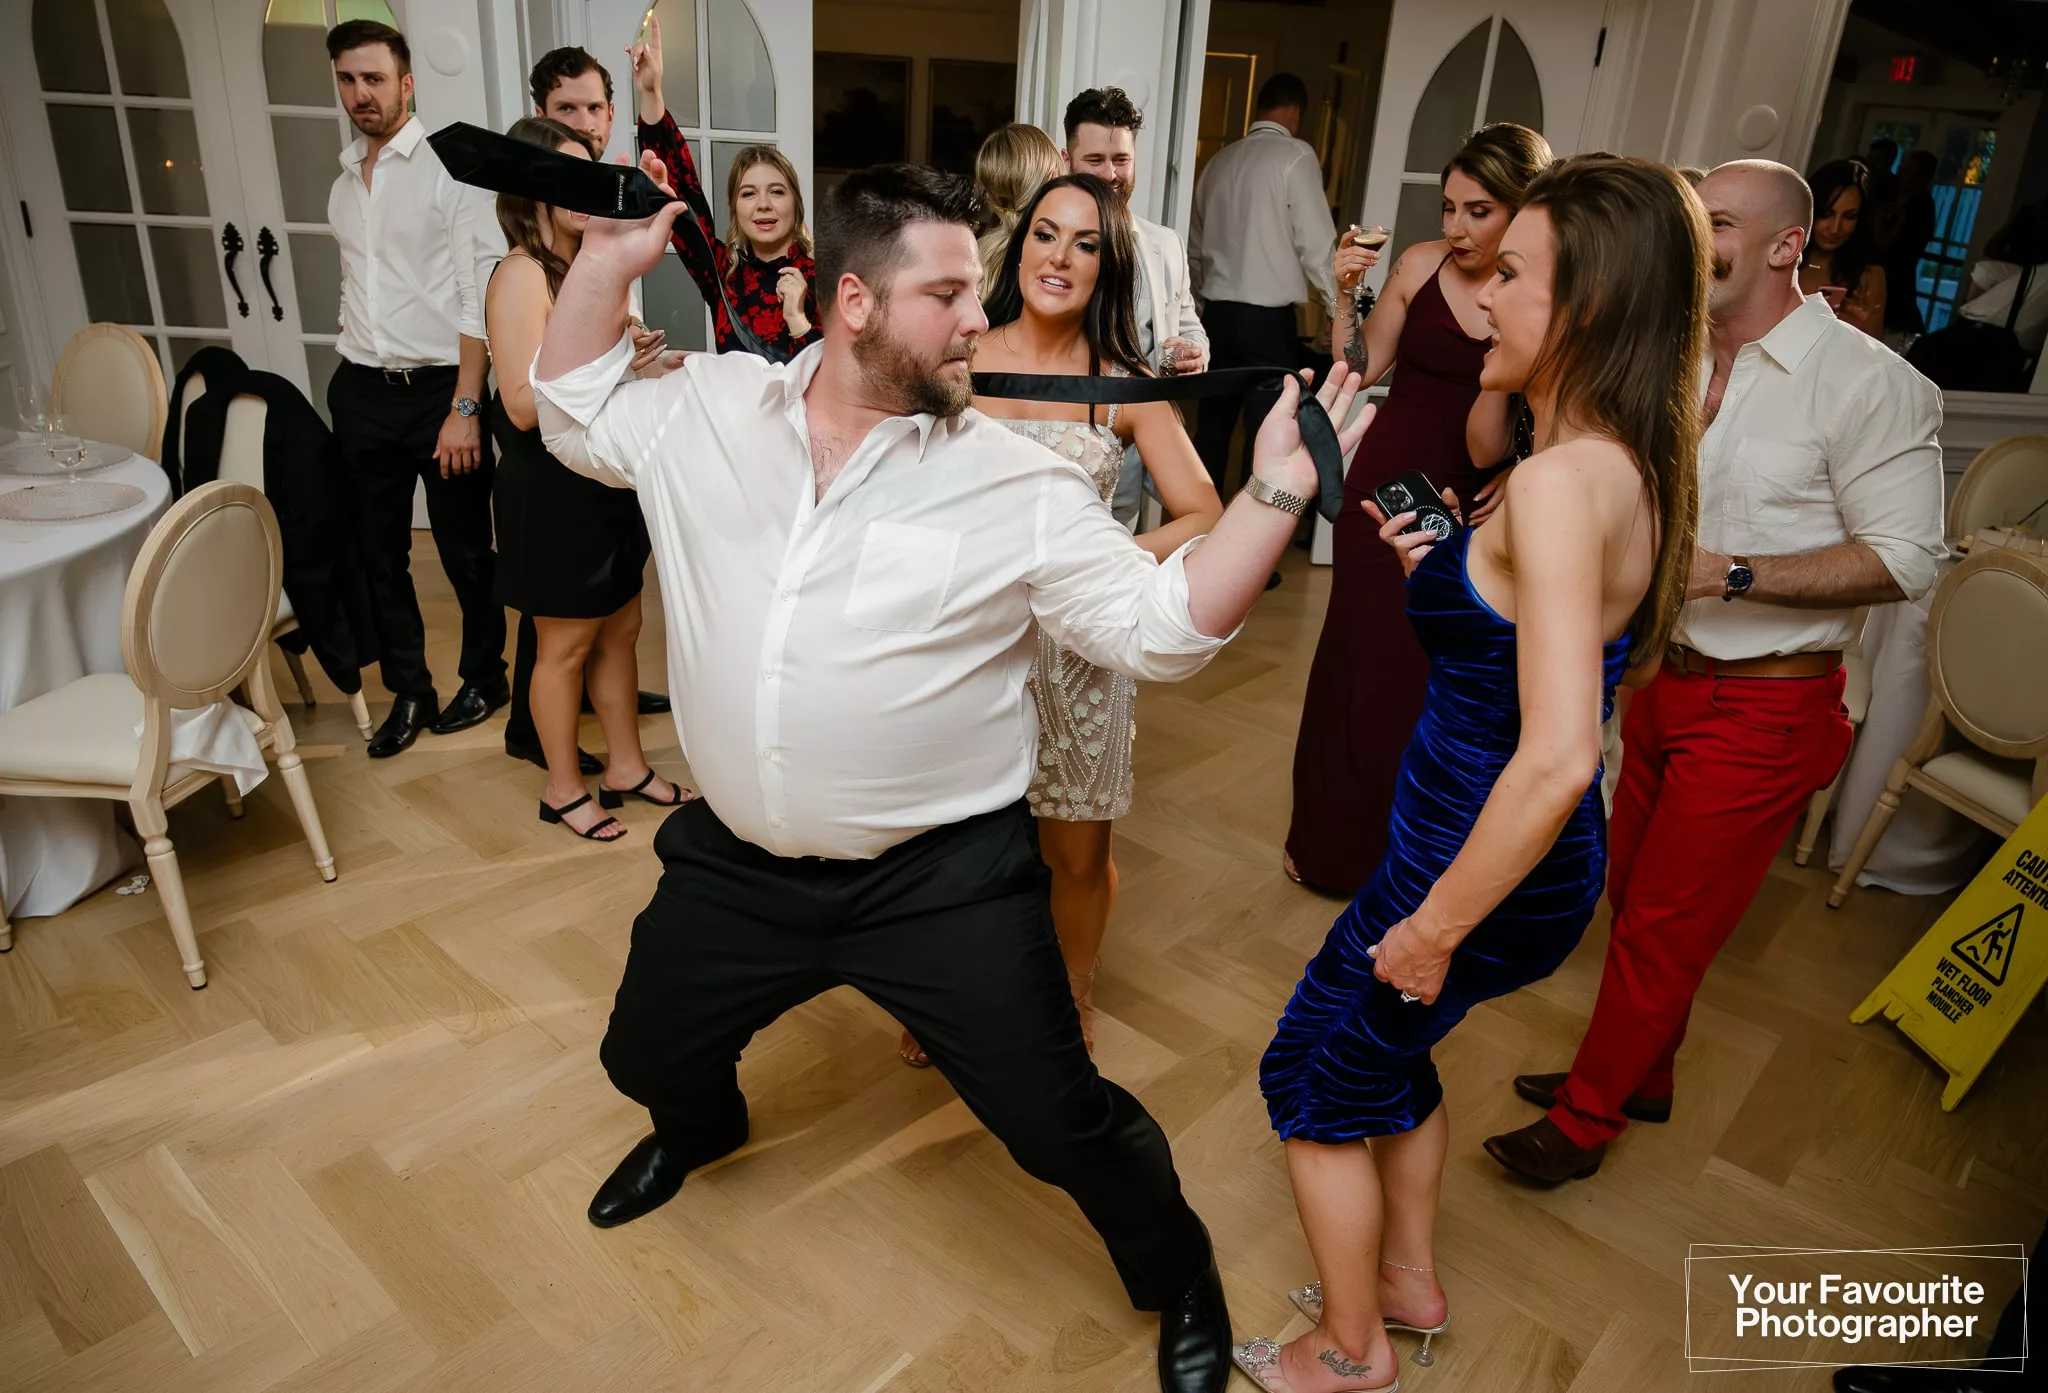 Wedding guests getting rowdy on the dance floor